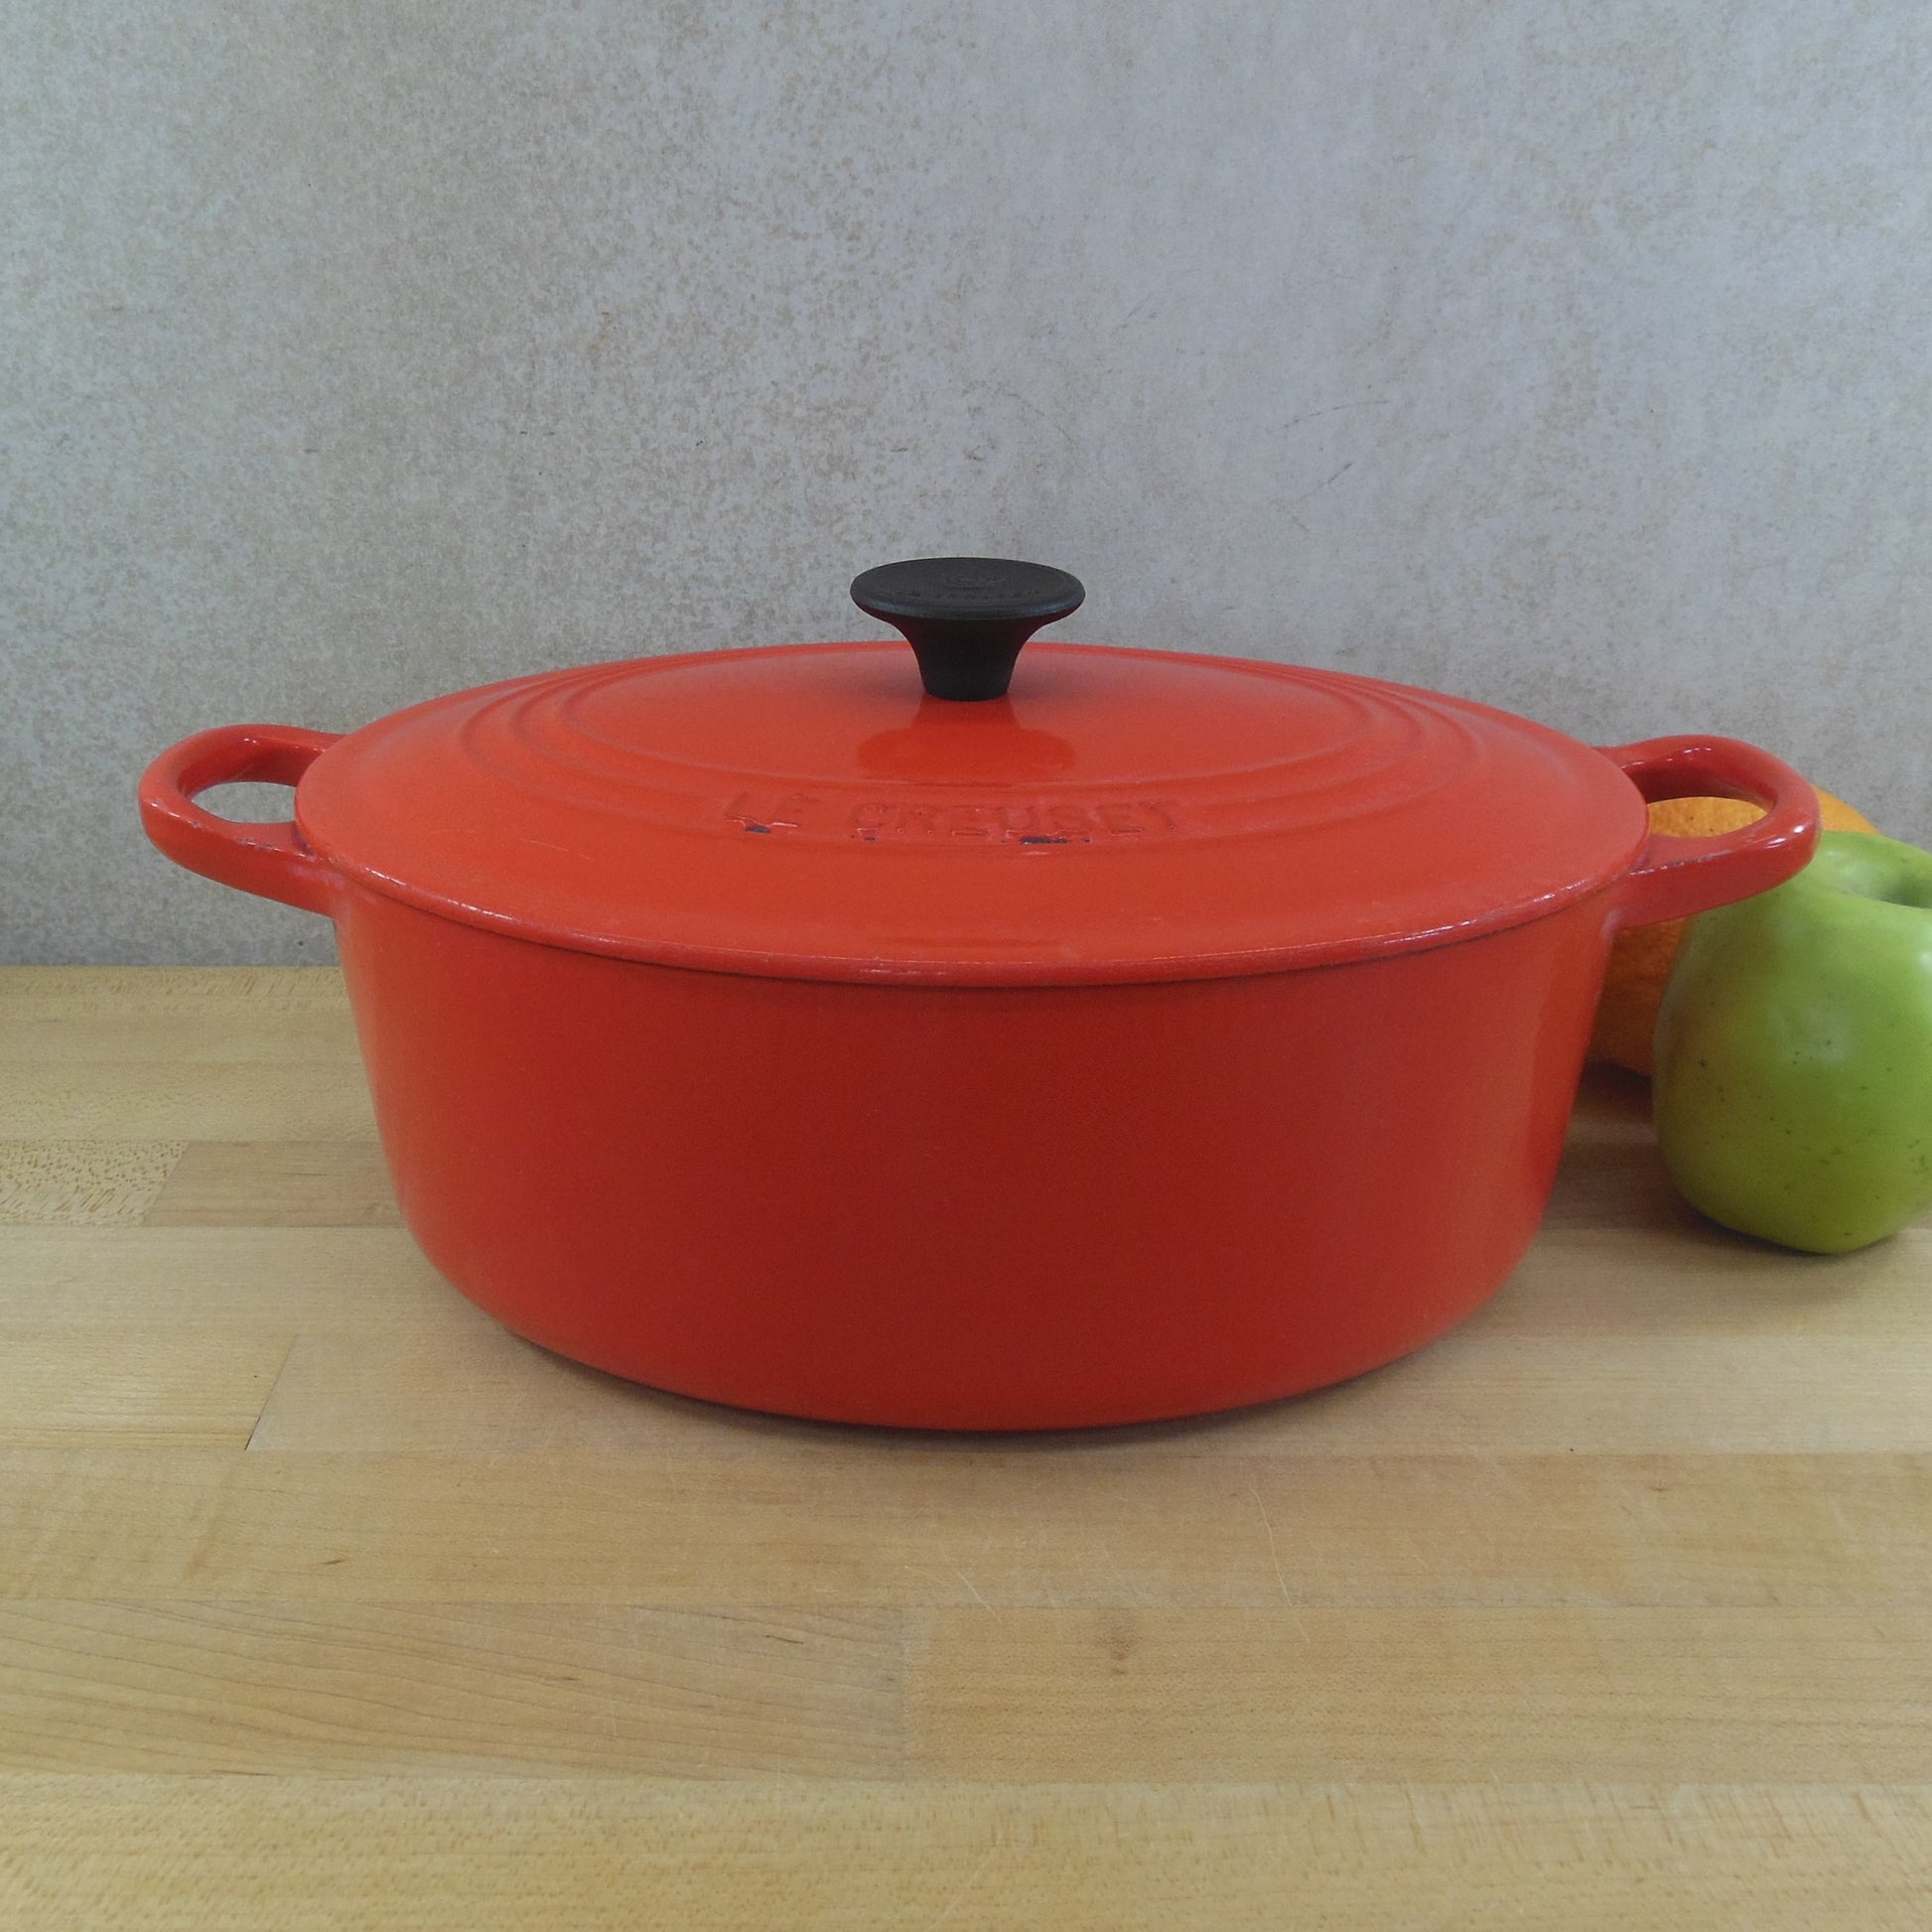 Le Creuset Cast Iron Oval Dutch Oven Red 6 3/4 qt In Great Used Condition!